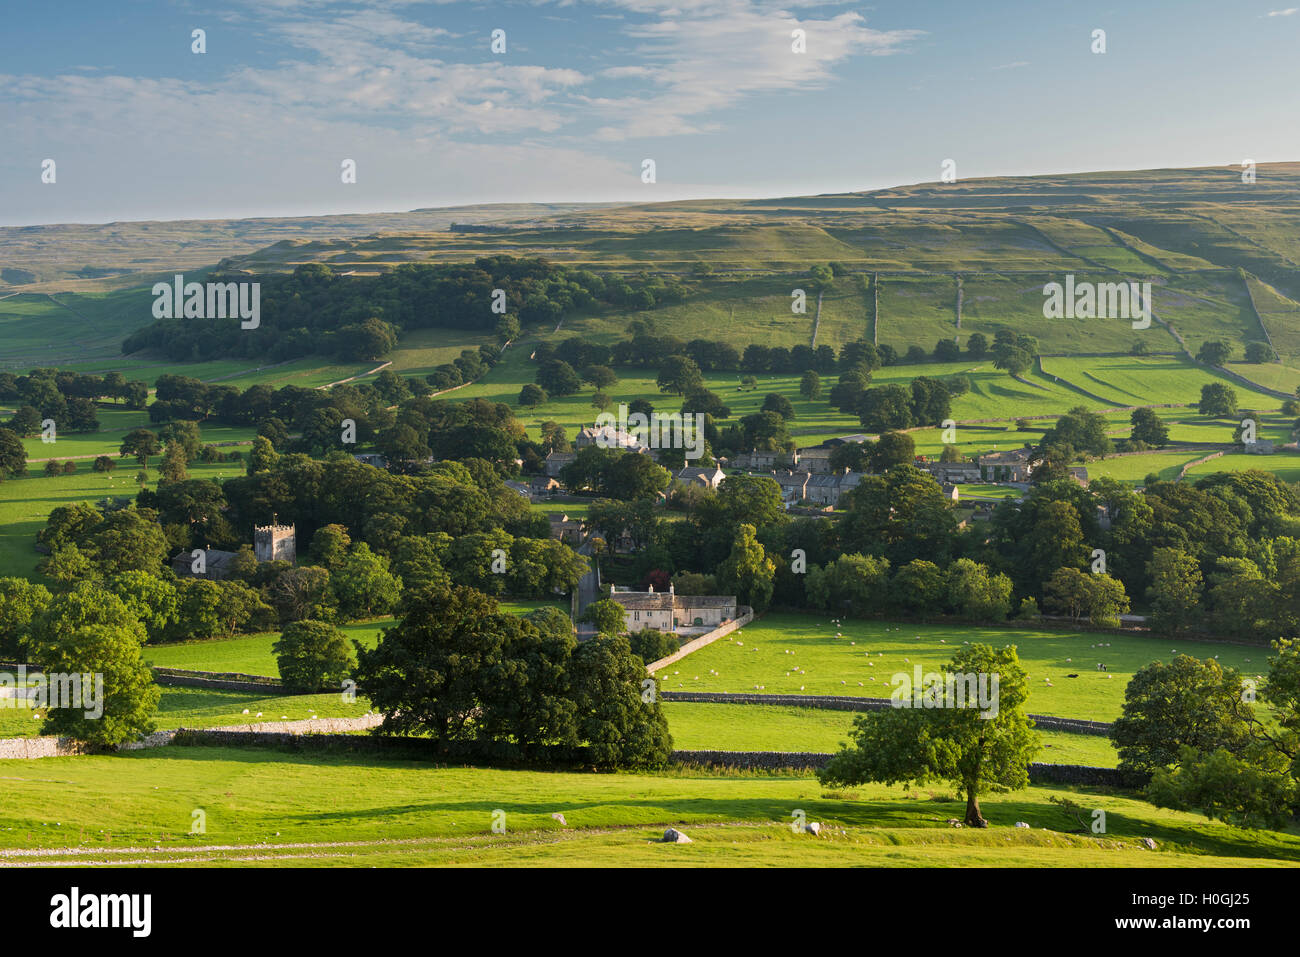 Summer evening view over picturesque Dales village of Arncliffe (church & houses) nestling in valley under sunlit hills - North Yorkshire, England, UK Stock Photo